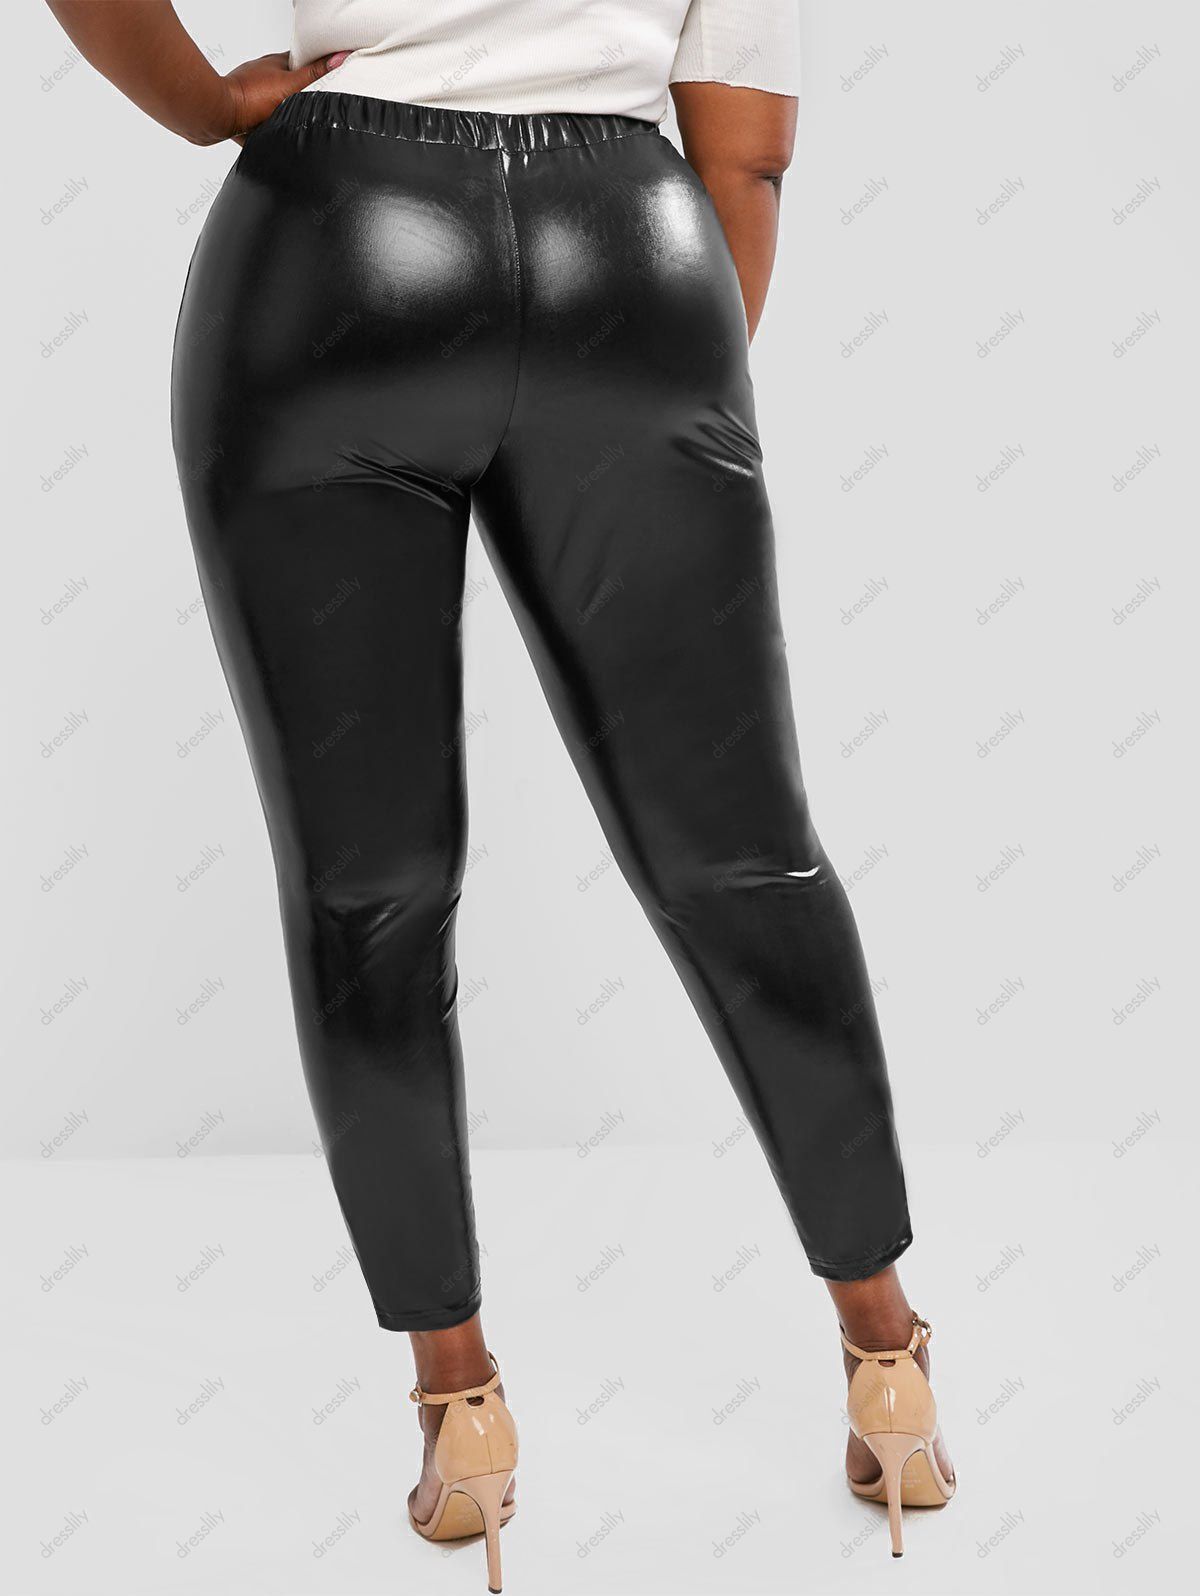 Bbw Leather Pantshigh Waist Faux Leather Leggings For Women - Stretchy Wet  Look Pencil Pants